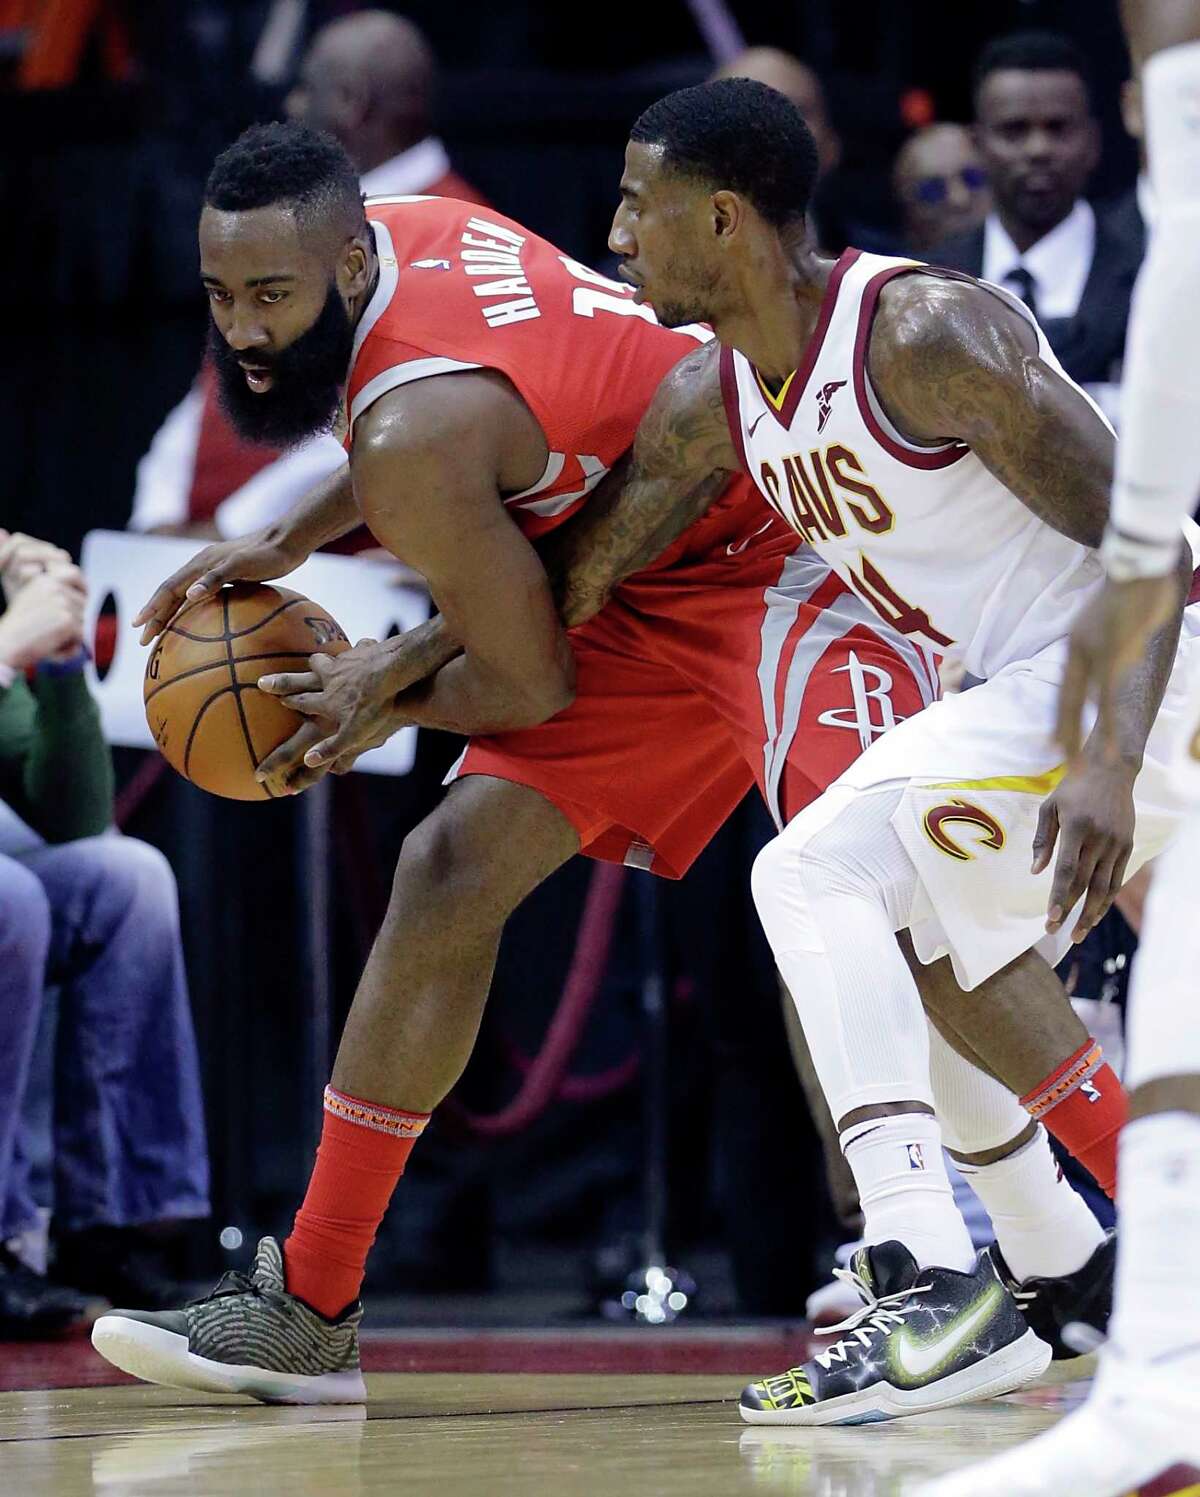 Houston Rockets guard James Harden (13) keeps the ball from the reach of Cleveland Cavaliers guard Iman Shumpert (4) during the first half of an NBA basketball game Thursday, Nov. 9, 2017, in Houston. (AP Photo/Michael Wyke)